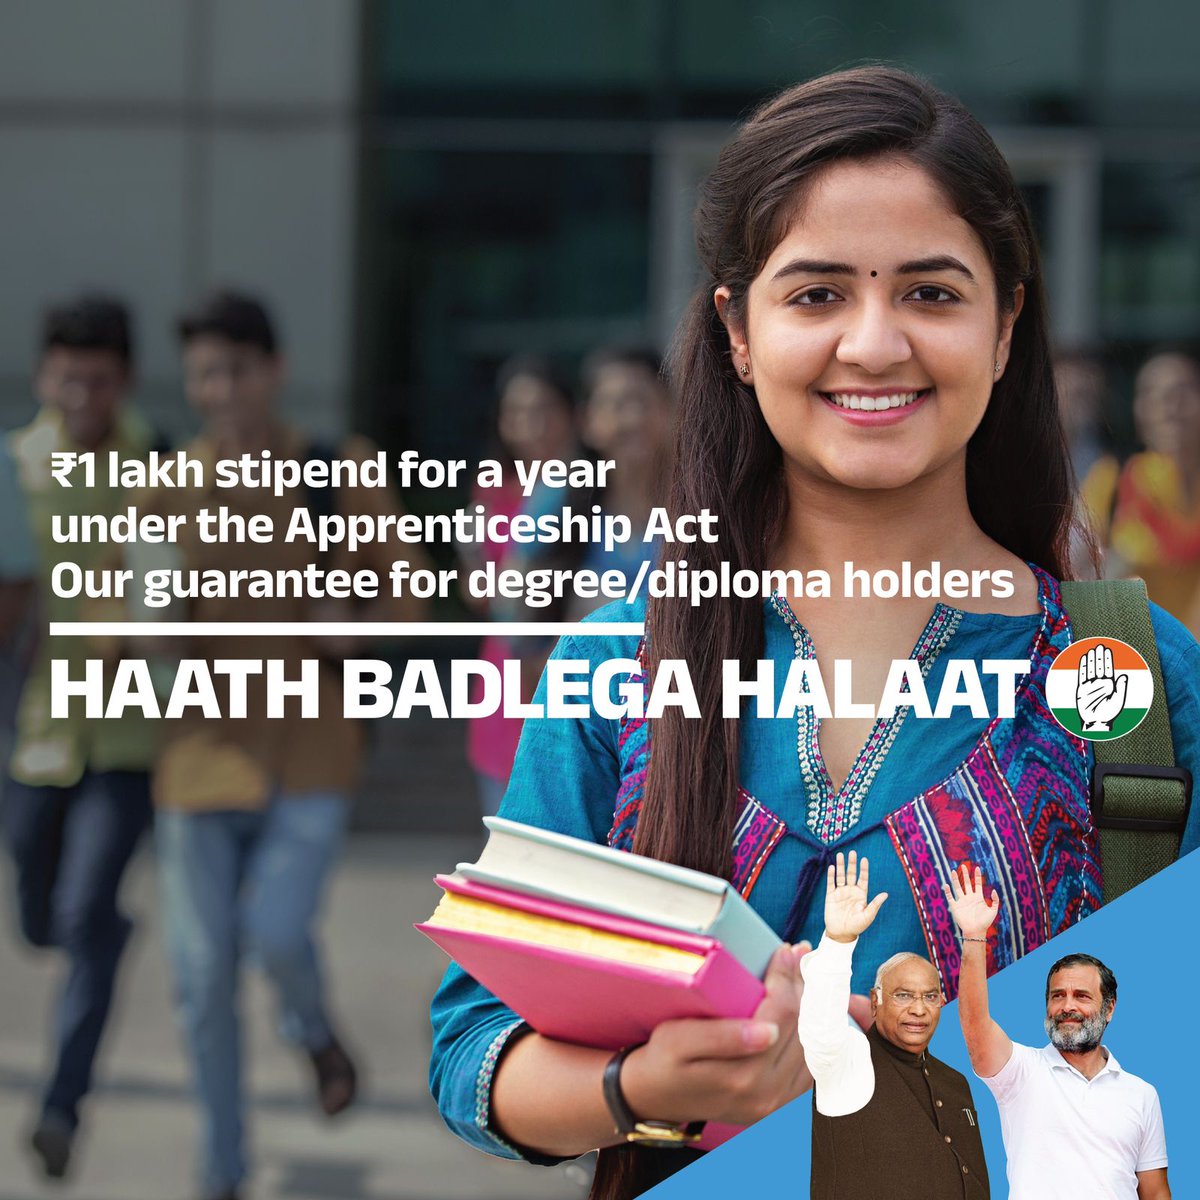 We reduced the age of voting to 18 years. As we believe in empowering youth! - 30 lakh govt jobs. - 1 lakh stipend for a year under Apprenticeship Act. Our Guarantee is to empower Youth by providing employment! Call 9911041424 to register for Congress's Nyay Guarantee!